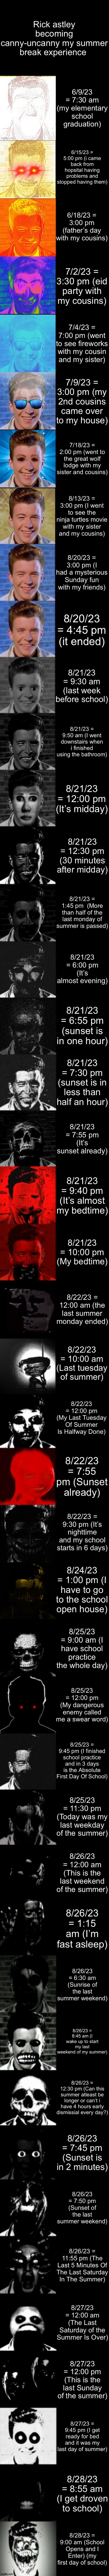 Rick Astley Becoming Canny to Uncanny Extended: My Summer Experience | Rick astley becoming canny-uncanny my summer break experience; 6/9/23 = 7:30 am (my elementary school graduation); 6/15/23 = 5:00 pm (i came back from hopsital having problems and stopped having them); 6/18/23 = 3:00 pm (father’s day with my cousins); 7/2/23 = 3:30 pm (eid party with my cousins); 7/4/23 = 7:00 pm (went to see fireworks with my cousin and my sister); 7/9/23 = 3:00 pm (my 2nd cousins came over to my house); 7/18/23 = 2:00 pm (went to the great wolf lodge with my sister and cousins); 8/13/23 = 3:00 pm (I went to see the ninja turtles movie with my sister and my cousins); 8/20/23 = 3:00 pm (I had a mysterious Sunday fun with my friends); 8/20/23 = 4:45 pm (it ended); 8/21/23 = 9:30 am (last week before school); 8/21/23 = 9:50 am (I went downstairs when i finished using the bathroom); 8/21/23 = 12:00 pm (It’s midday); 8/21/23 = 12:30 pm (30 minutes after midday); 8/21/23 = 1:45 pm  (More than half of the last monday of summer is passed); 8/21/23 = 6:00 pm (It’s almost evening); 8/21/23 = 6:55 pm (sunset is in one hour); 8/21/23 = 7:30 pm (sunset is in less than half an hour); 8/21/23 = 7:55 pm (It’s sunset already); 8/21/23 = 9:40 pm (It’s almost my bedtime); 8/21/23 = 10:00 pm (My bedtime); 8/22/23 = 12:00 am (the last summer monday ended); 8/22/23 = 10:00 am (Last tuesday of summer); 8/22/23 = 12:00 pm (My Last Tuesday Of Summer Is Halfway Done); 8/22/23 = 7:55 pm (Sunset already); 8/22/23 = 9:30 pm (It’s nighttime and my school starts in 6 days); 8/24/23 = 1:00 pm (I have to go to the school open house); 8/25/23 = 9:00 am (I have school practice the whole day); 8/25/23 = 12:00 pm (My dangerous enemy called me a swear word); 8/25/23 = 9:45 pm (I finished school practice and in 3 days is the Absolute First Day Of School); 8/25/23 = 11:30 pm (Today was my last weekday of the summer); 8/26/23 = 12:00 am (This is the last weekend of the summer); 8/26/23 = 1:15 am (I’m fast asleep); 8/26/23 = 6:30 am (Sunrise of the last summer weekend); 8/26/23 = 8:45 am (I wake up to start my last weekend of my summer); 8/26/23 = 12:30 pm (Can this summer atleast be longer or can’t i have 4 hours early dismissial every day?); 8/26/23 = 7:45 pm (Sunset is in 2 minutes); 8/26/23 = 7:50 pm (Sunset of the last summer weekend); 8/26/23 = 11:55 pm (The Last 5 Minutes Of The Last Saturday In The Summer); 8/27/23 = 12:00 am (The Last Saturday of the Summer Is Over); 8/27/23 = 12:00 pm (This is the last Sunday of the summer); 8/27/23 = 9:45 pm (I get ready for bed and it was my last day of summer); 8/28/23 = 8:55 am (I get droven to school); 8/28/23 = 9:00 am (School Opens and I Enter) (my first day of school) | image tagged in rick astley becoming uncanny ultra extended | made w/ Imgflip meme maker